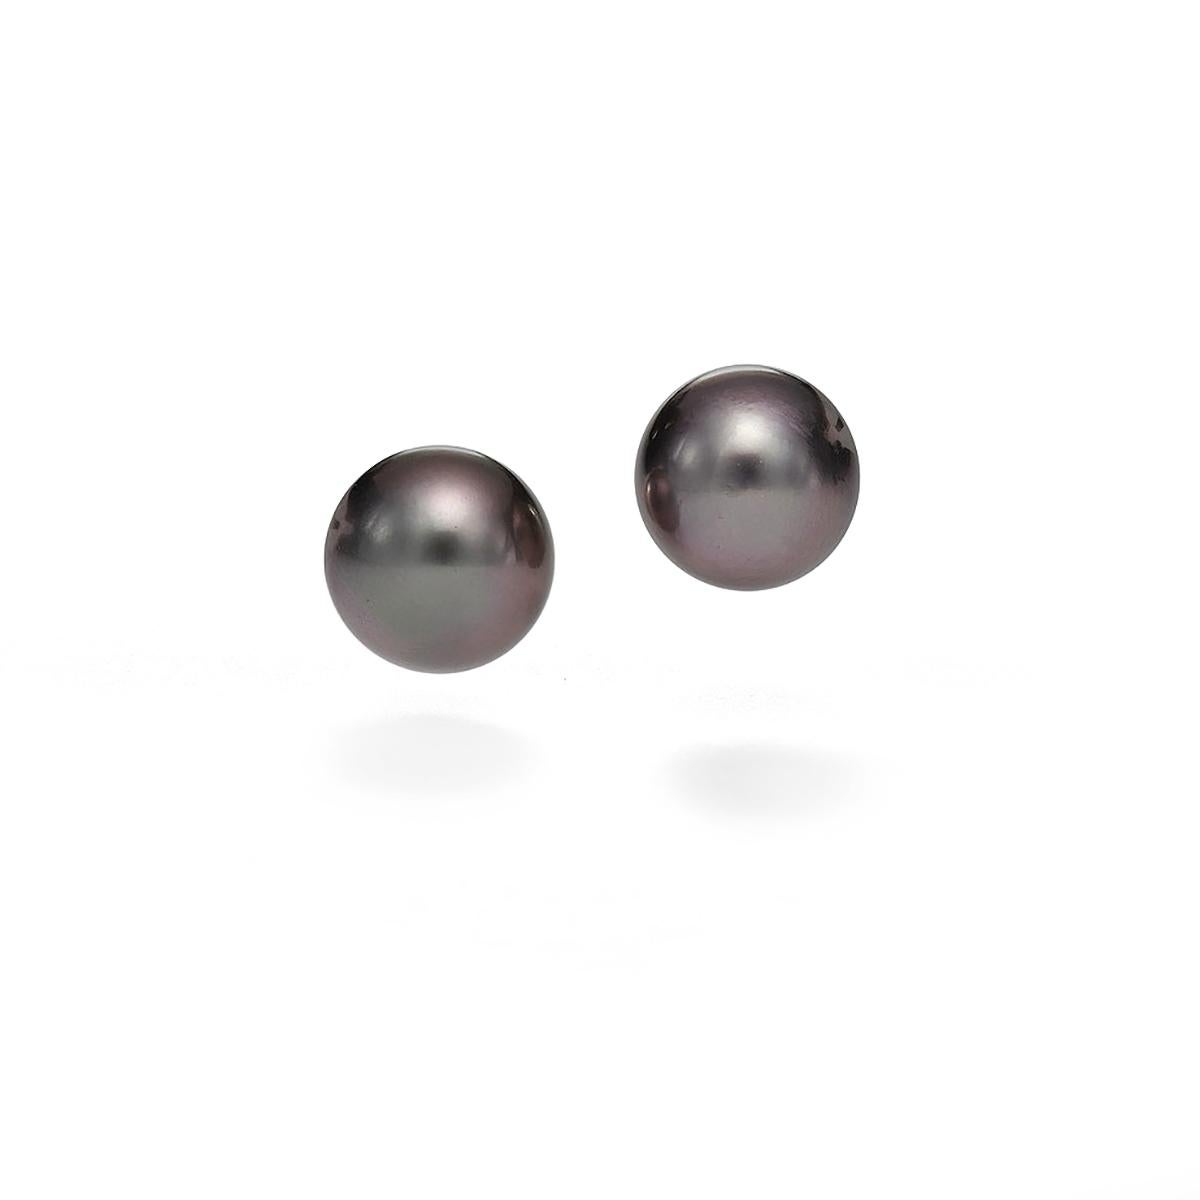 Earrings in 18kt white gold set with two black pearls  14.20 - 14.40mm